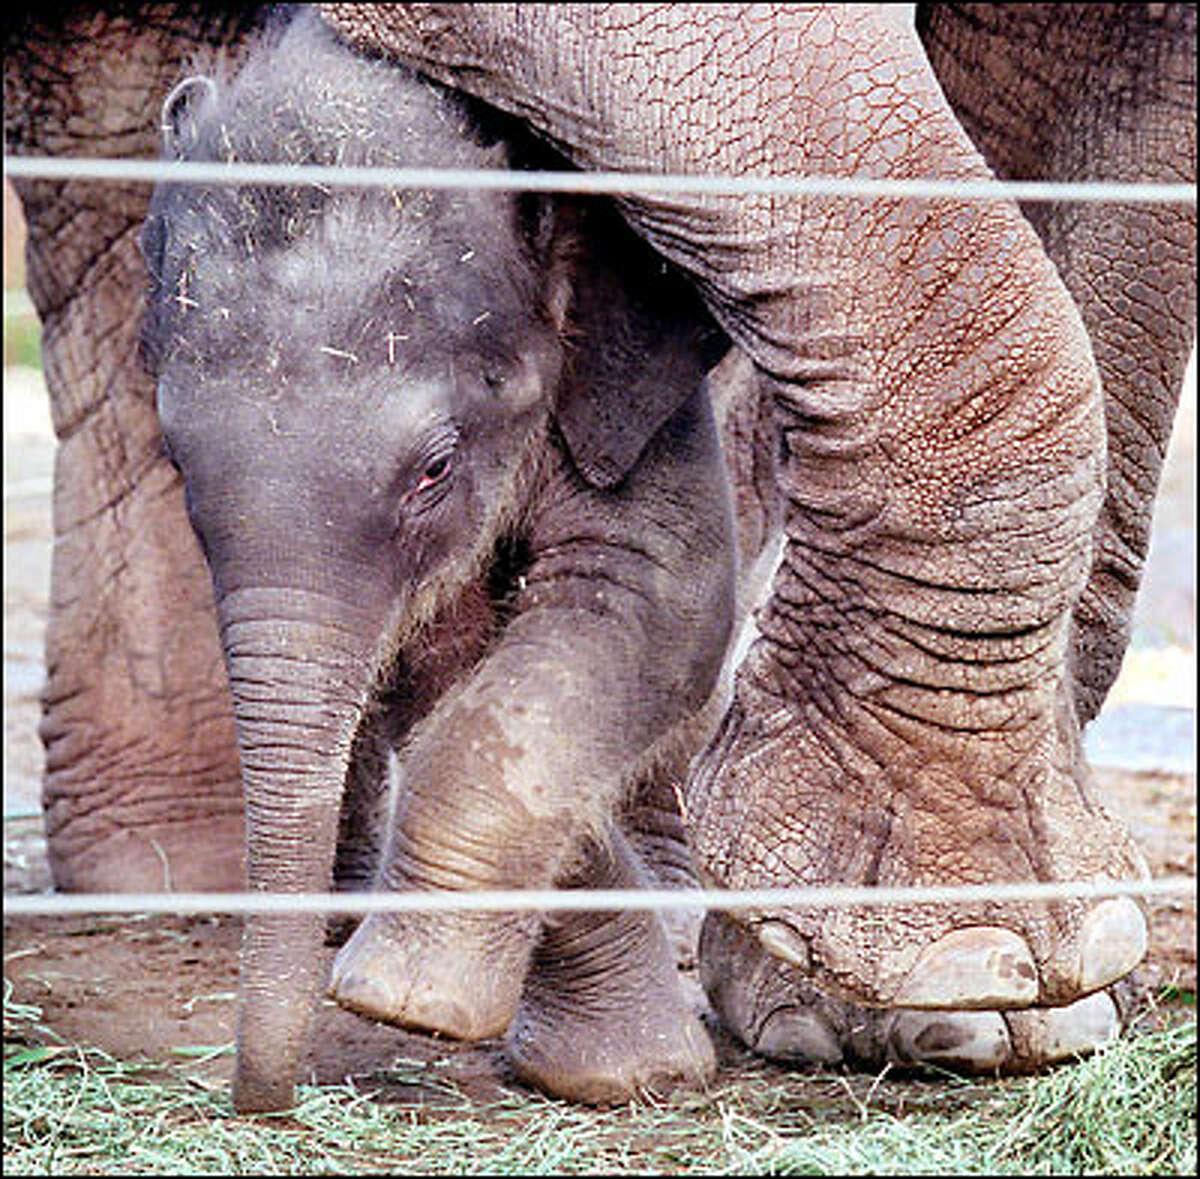 The Woodland Park Zoo's new baby elephant squeezes between the legs of her mother, Chai. The zoo is holding a contest to name the 530-pound pachyderm, which was born Nov. 3. "The name has to be of Thai origin," says Gigi Allianic, public-relations manager at the zoo.